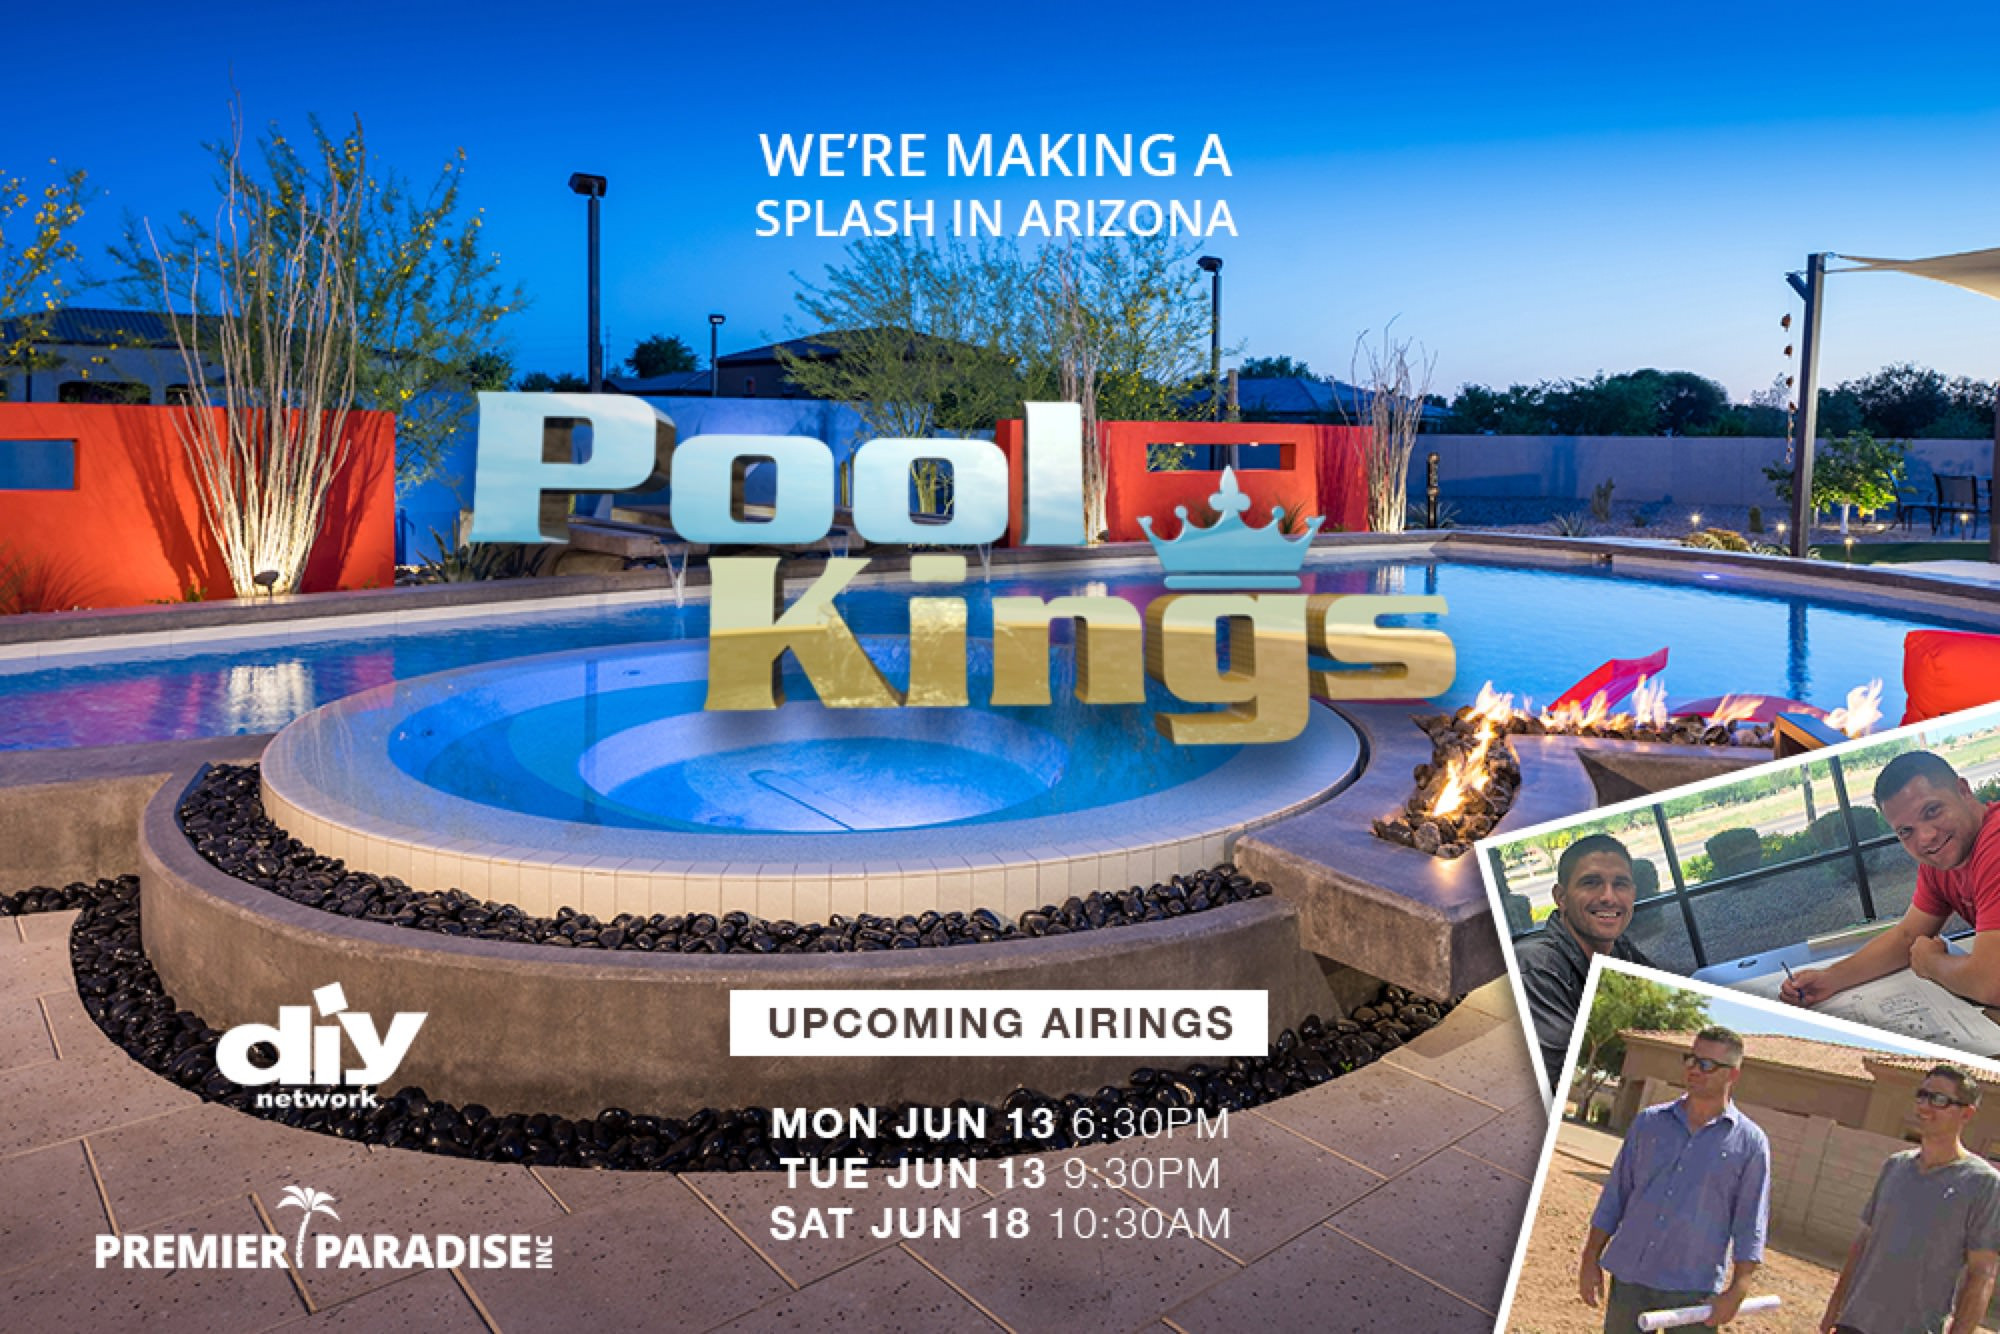 Best ideas about DIY Pool Kings
. Save or Pin Watch Premier Paradise on DIY Network s Pool Kings next Now.